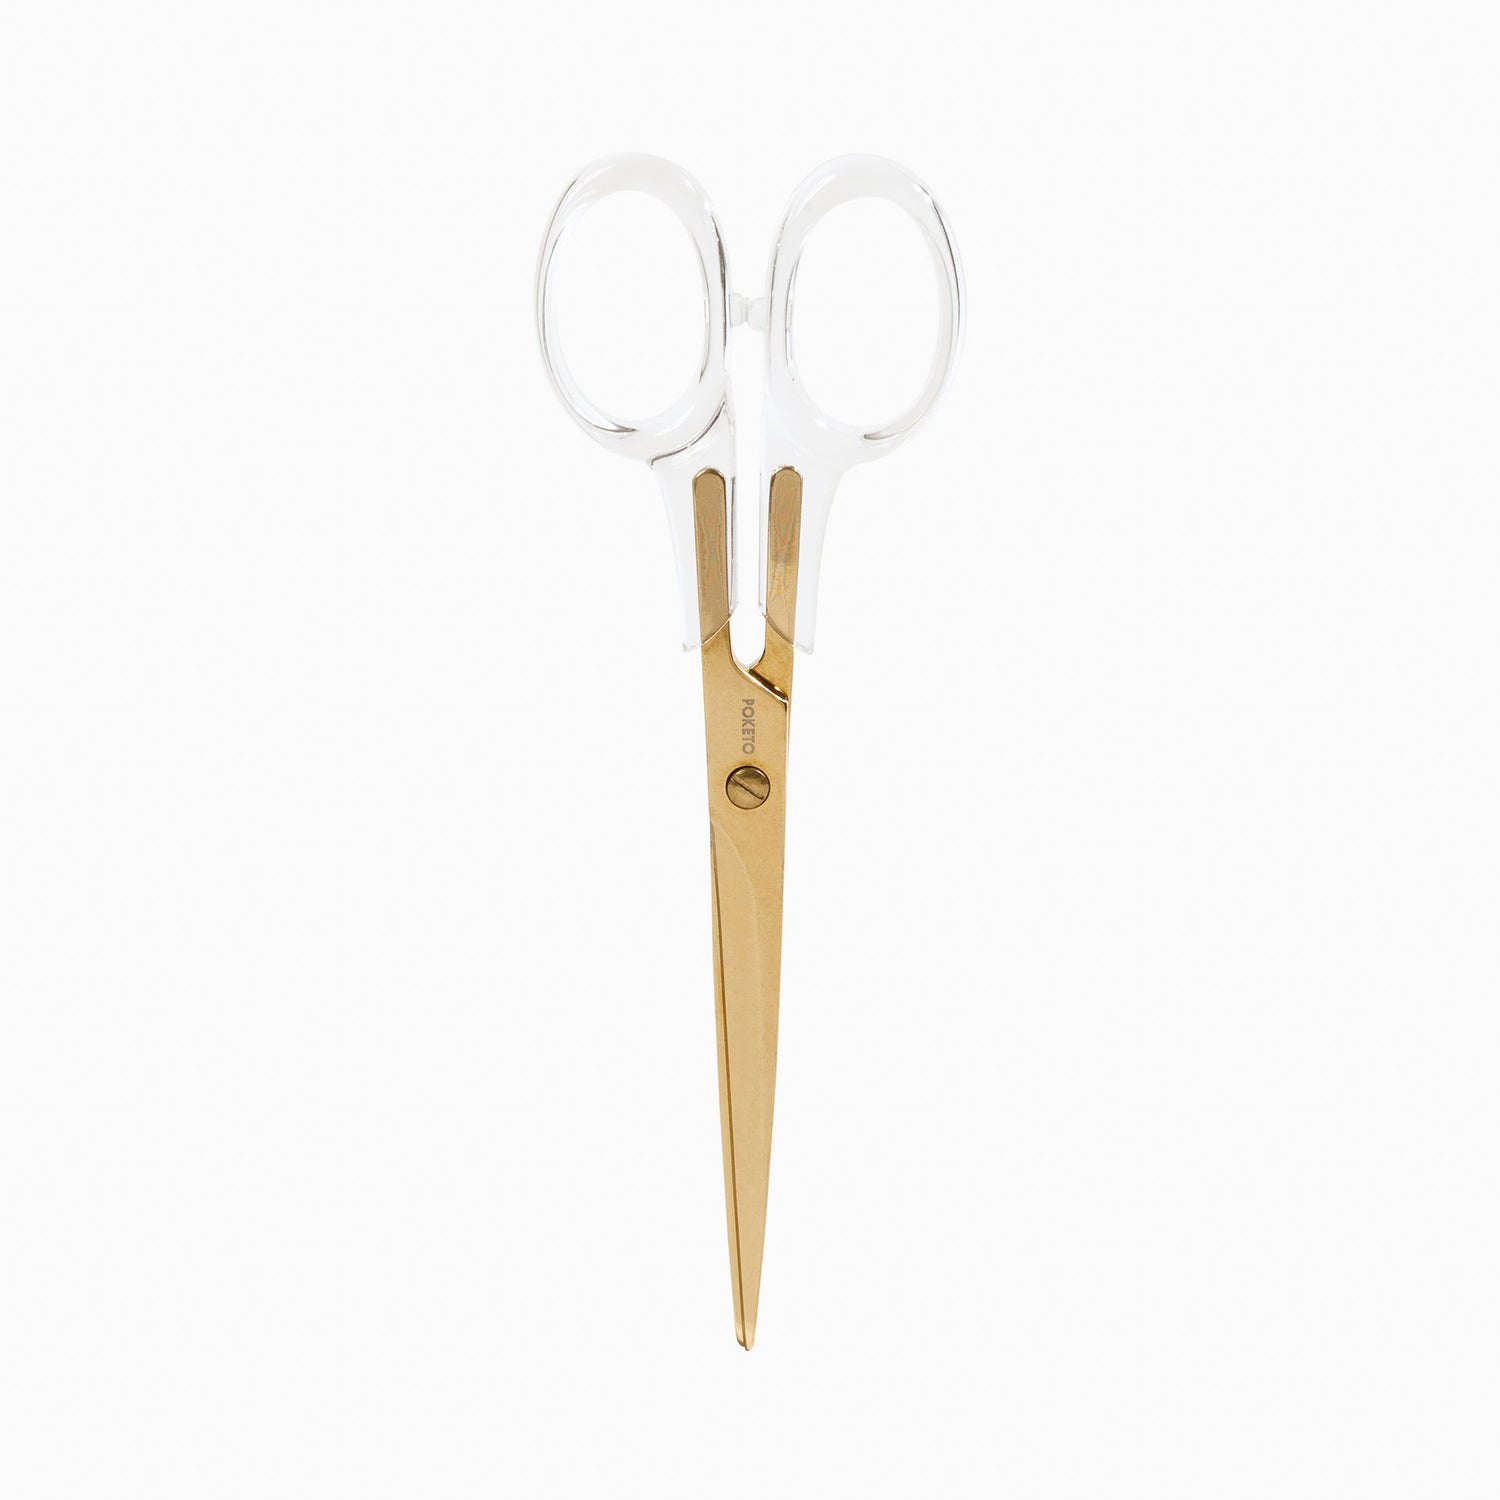 Poketo lucite Scissors in Gold. Available at Easy Tiger Toronto.